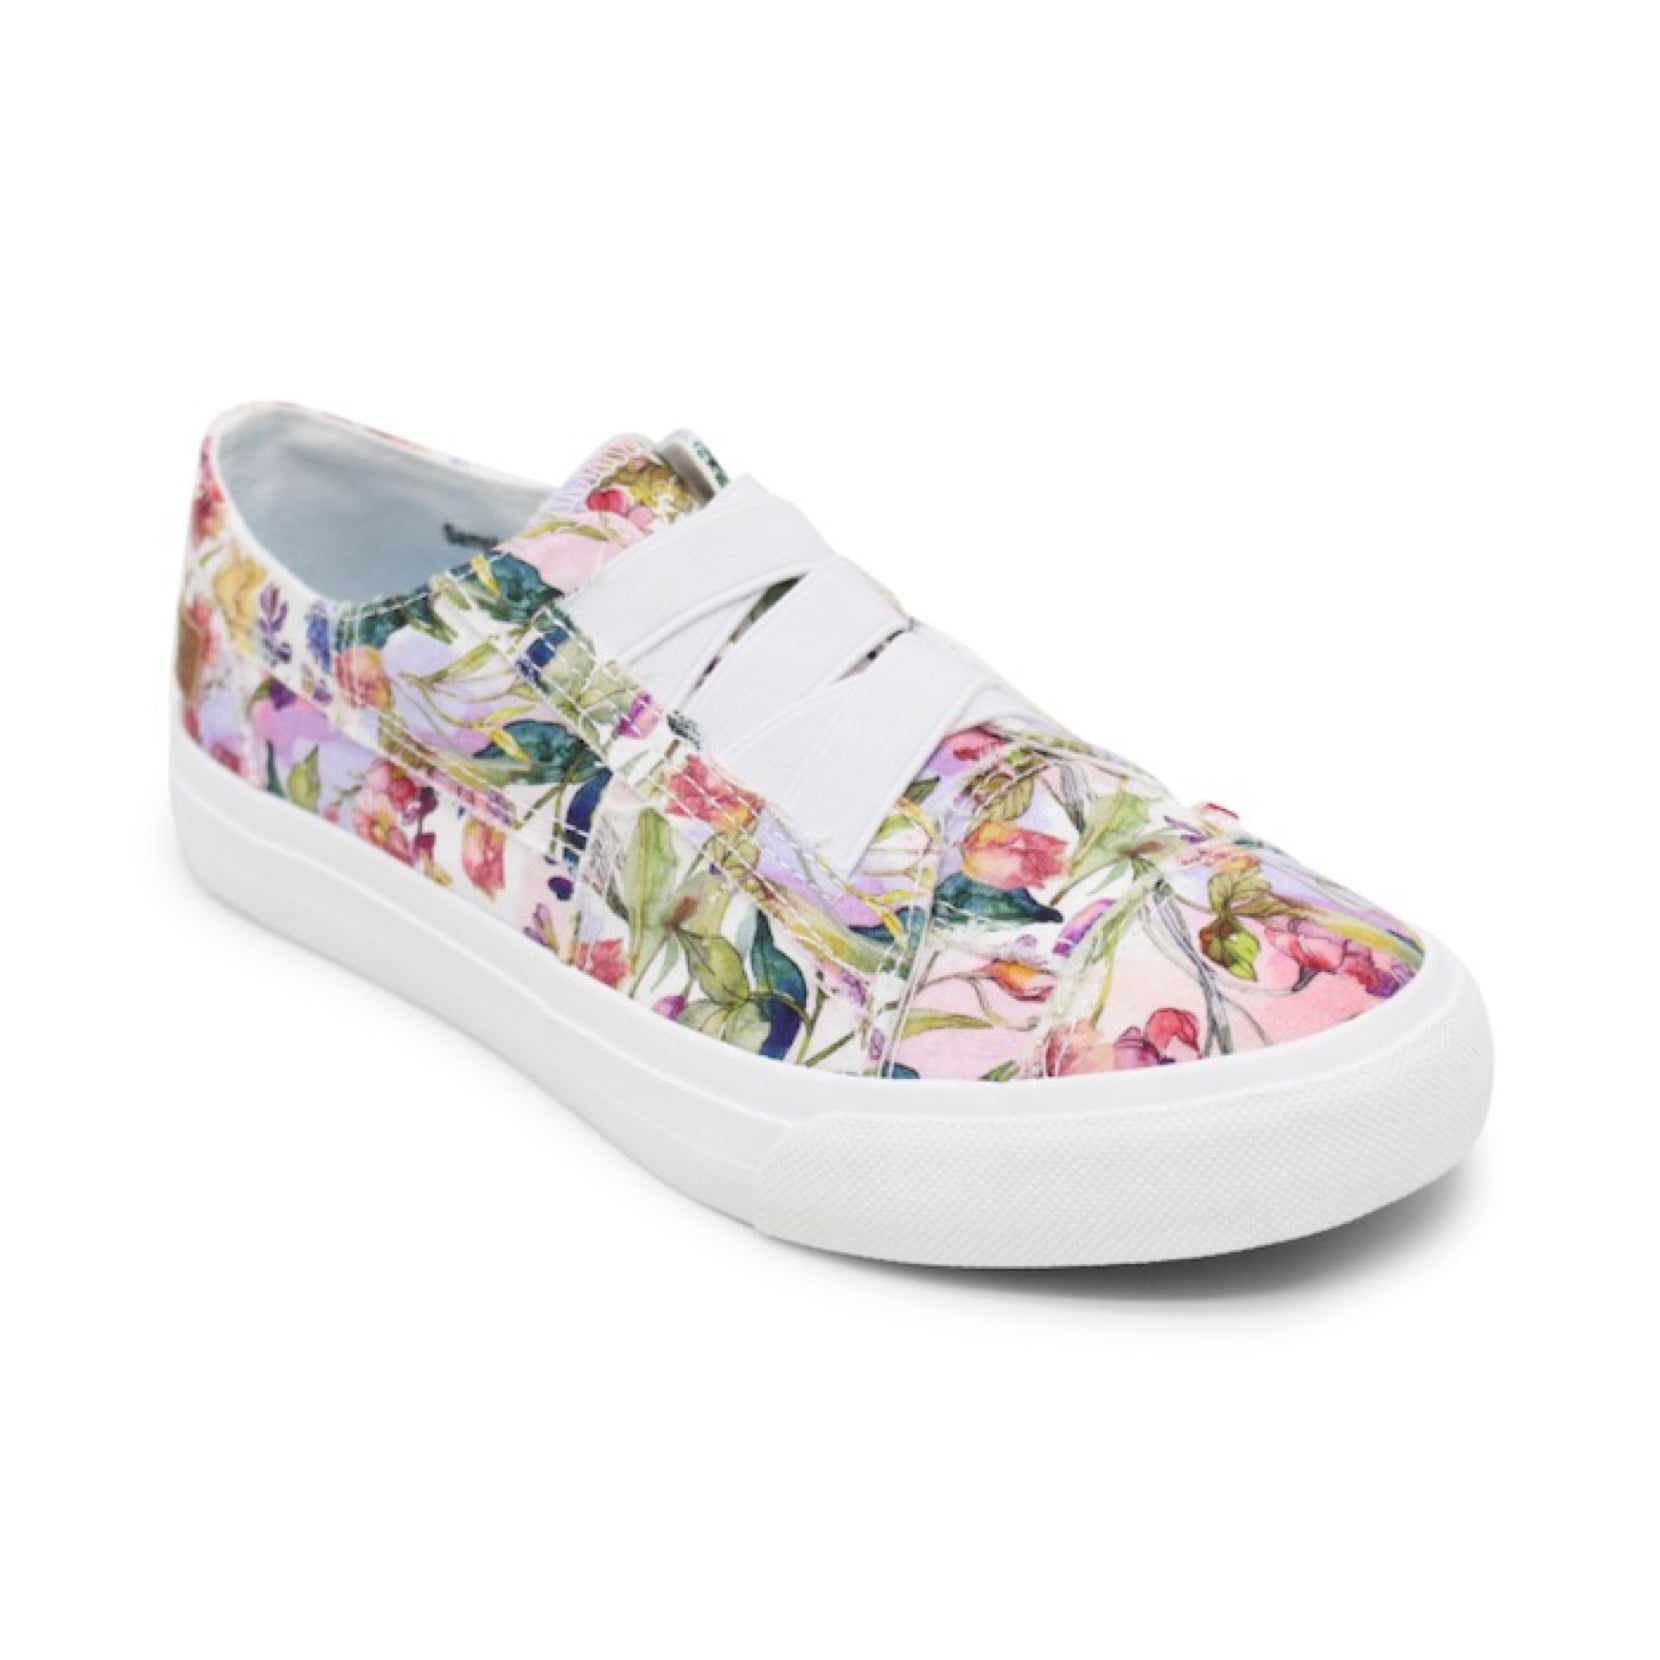 Blowfish Malibu Women's Marley Sneaker by Coded PR for use by 360 Magazine